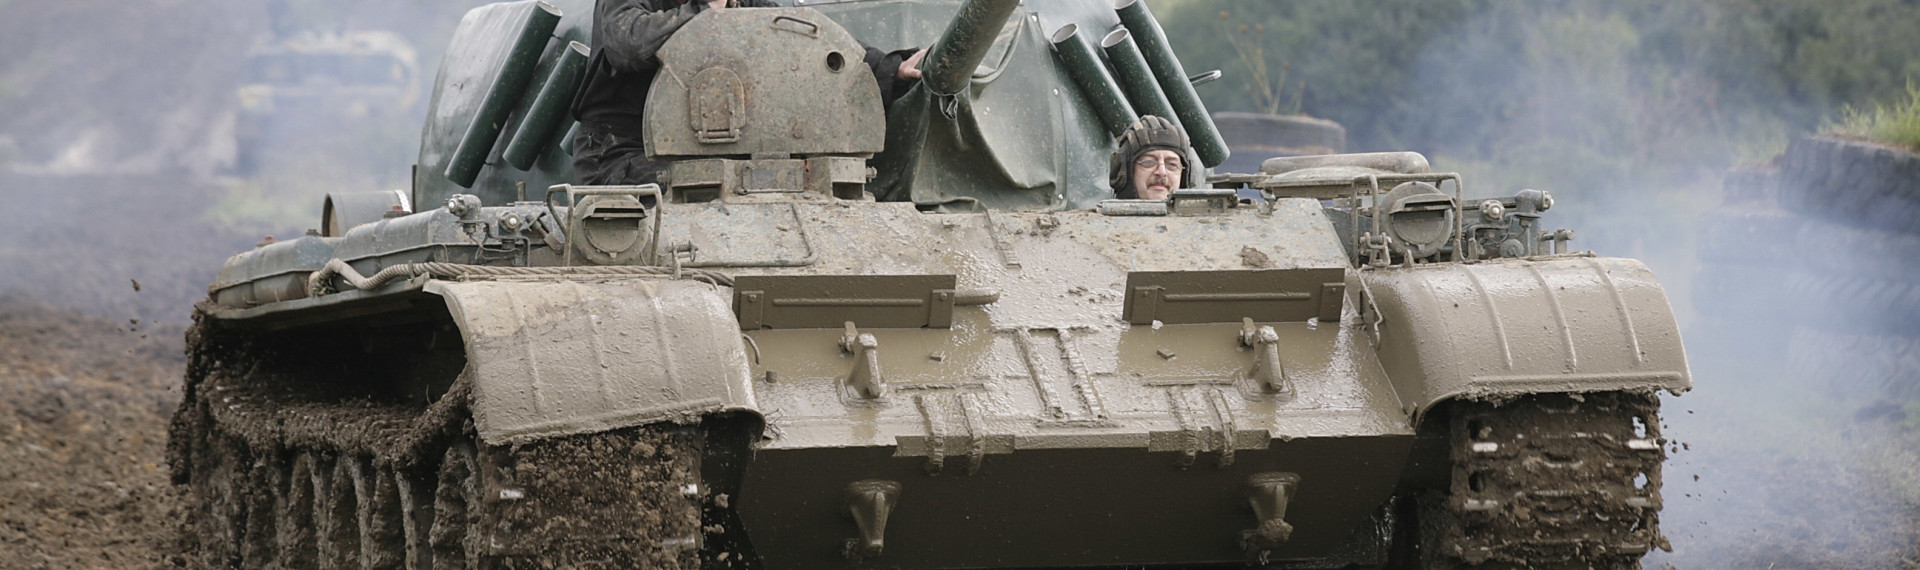 Battle Tank T-55 Driving Experience Budapest | Pissup Tours